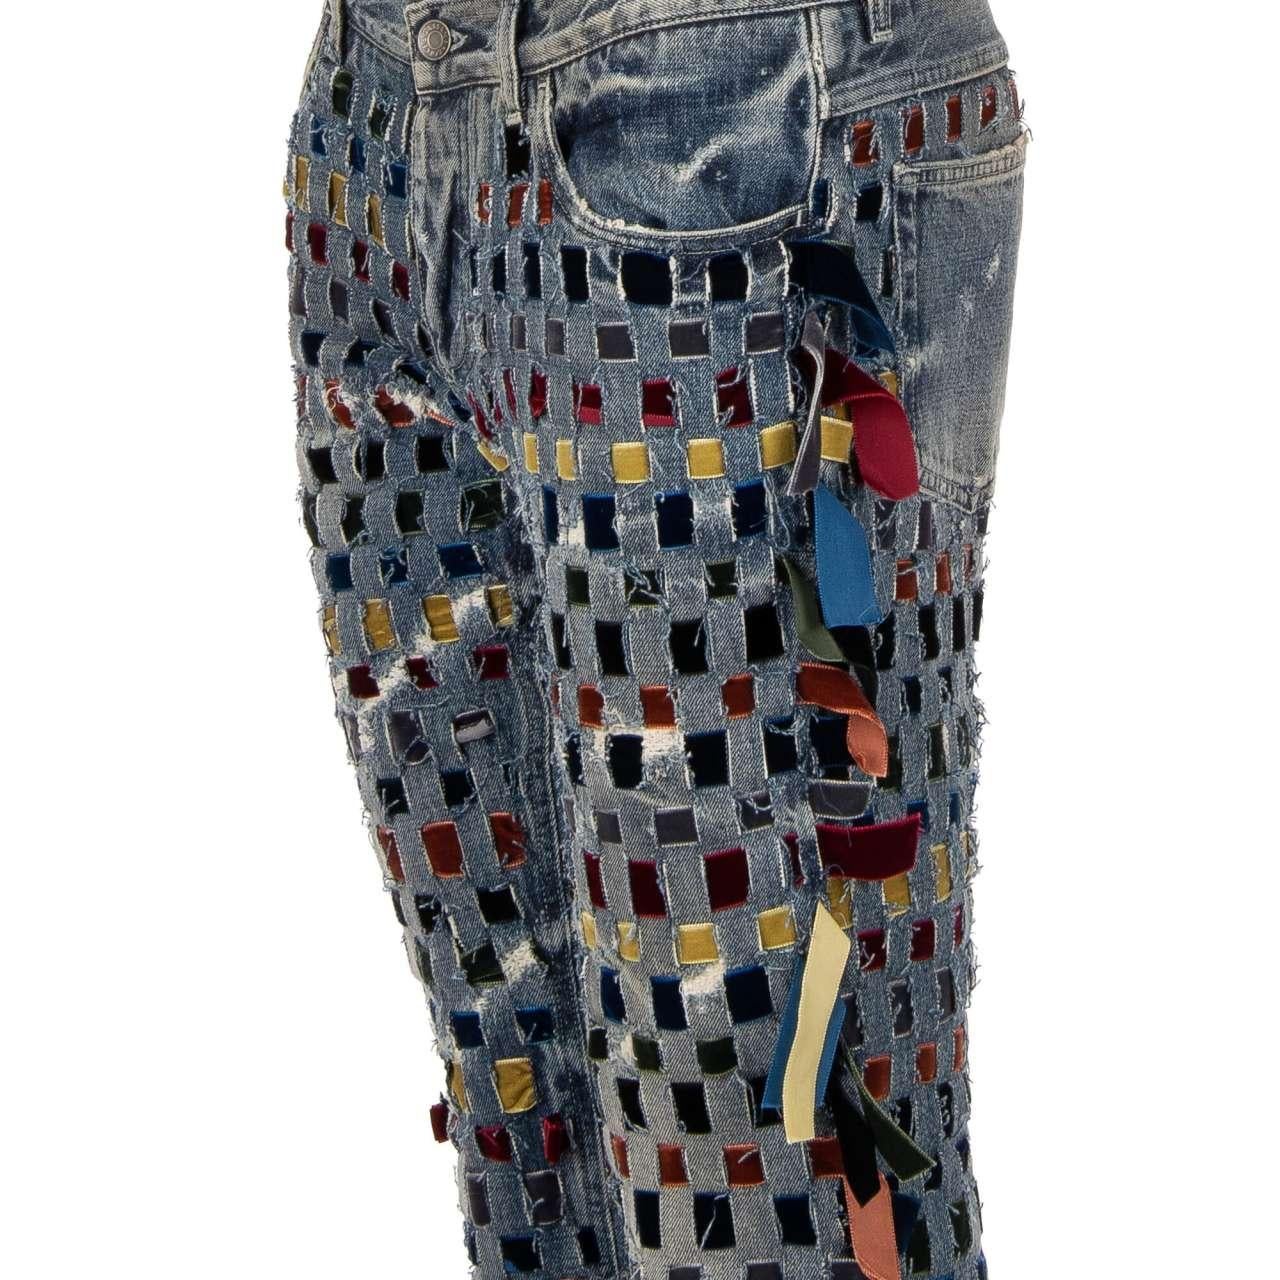 - Distressed straight cut 5-pockets Jeans with hand crafted velvet ribbons net structure by DOLCE & GABBANA - New with tag - MADE IN ITALY - Straight Cut - Model: GY70LD-G8V45-S9001 - Material: 100% Cotton - Color: Light Blue - 5 Pockes Jeans - Hand